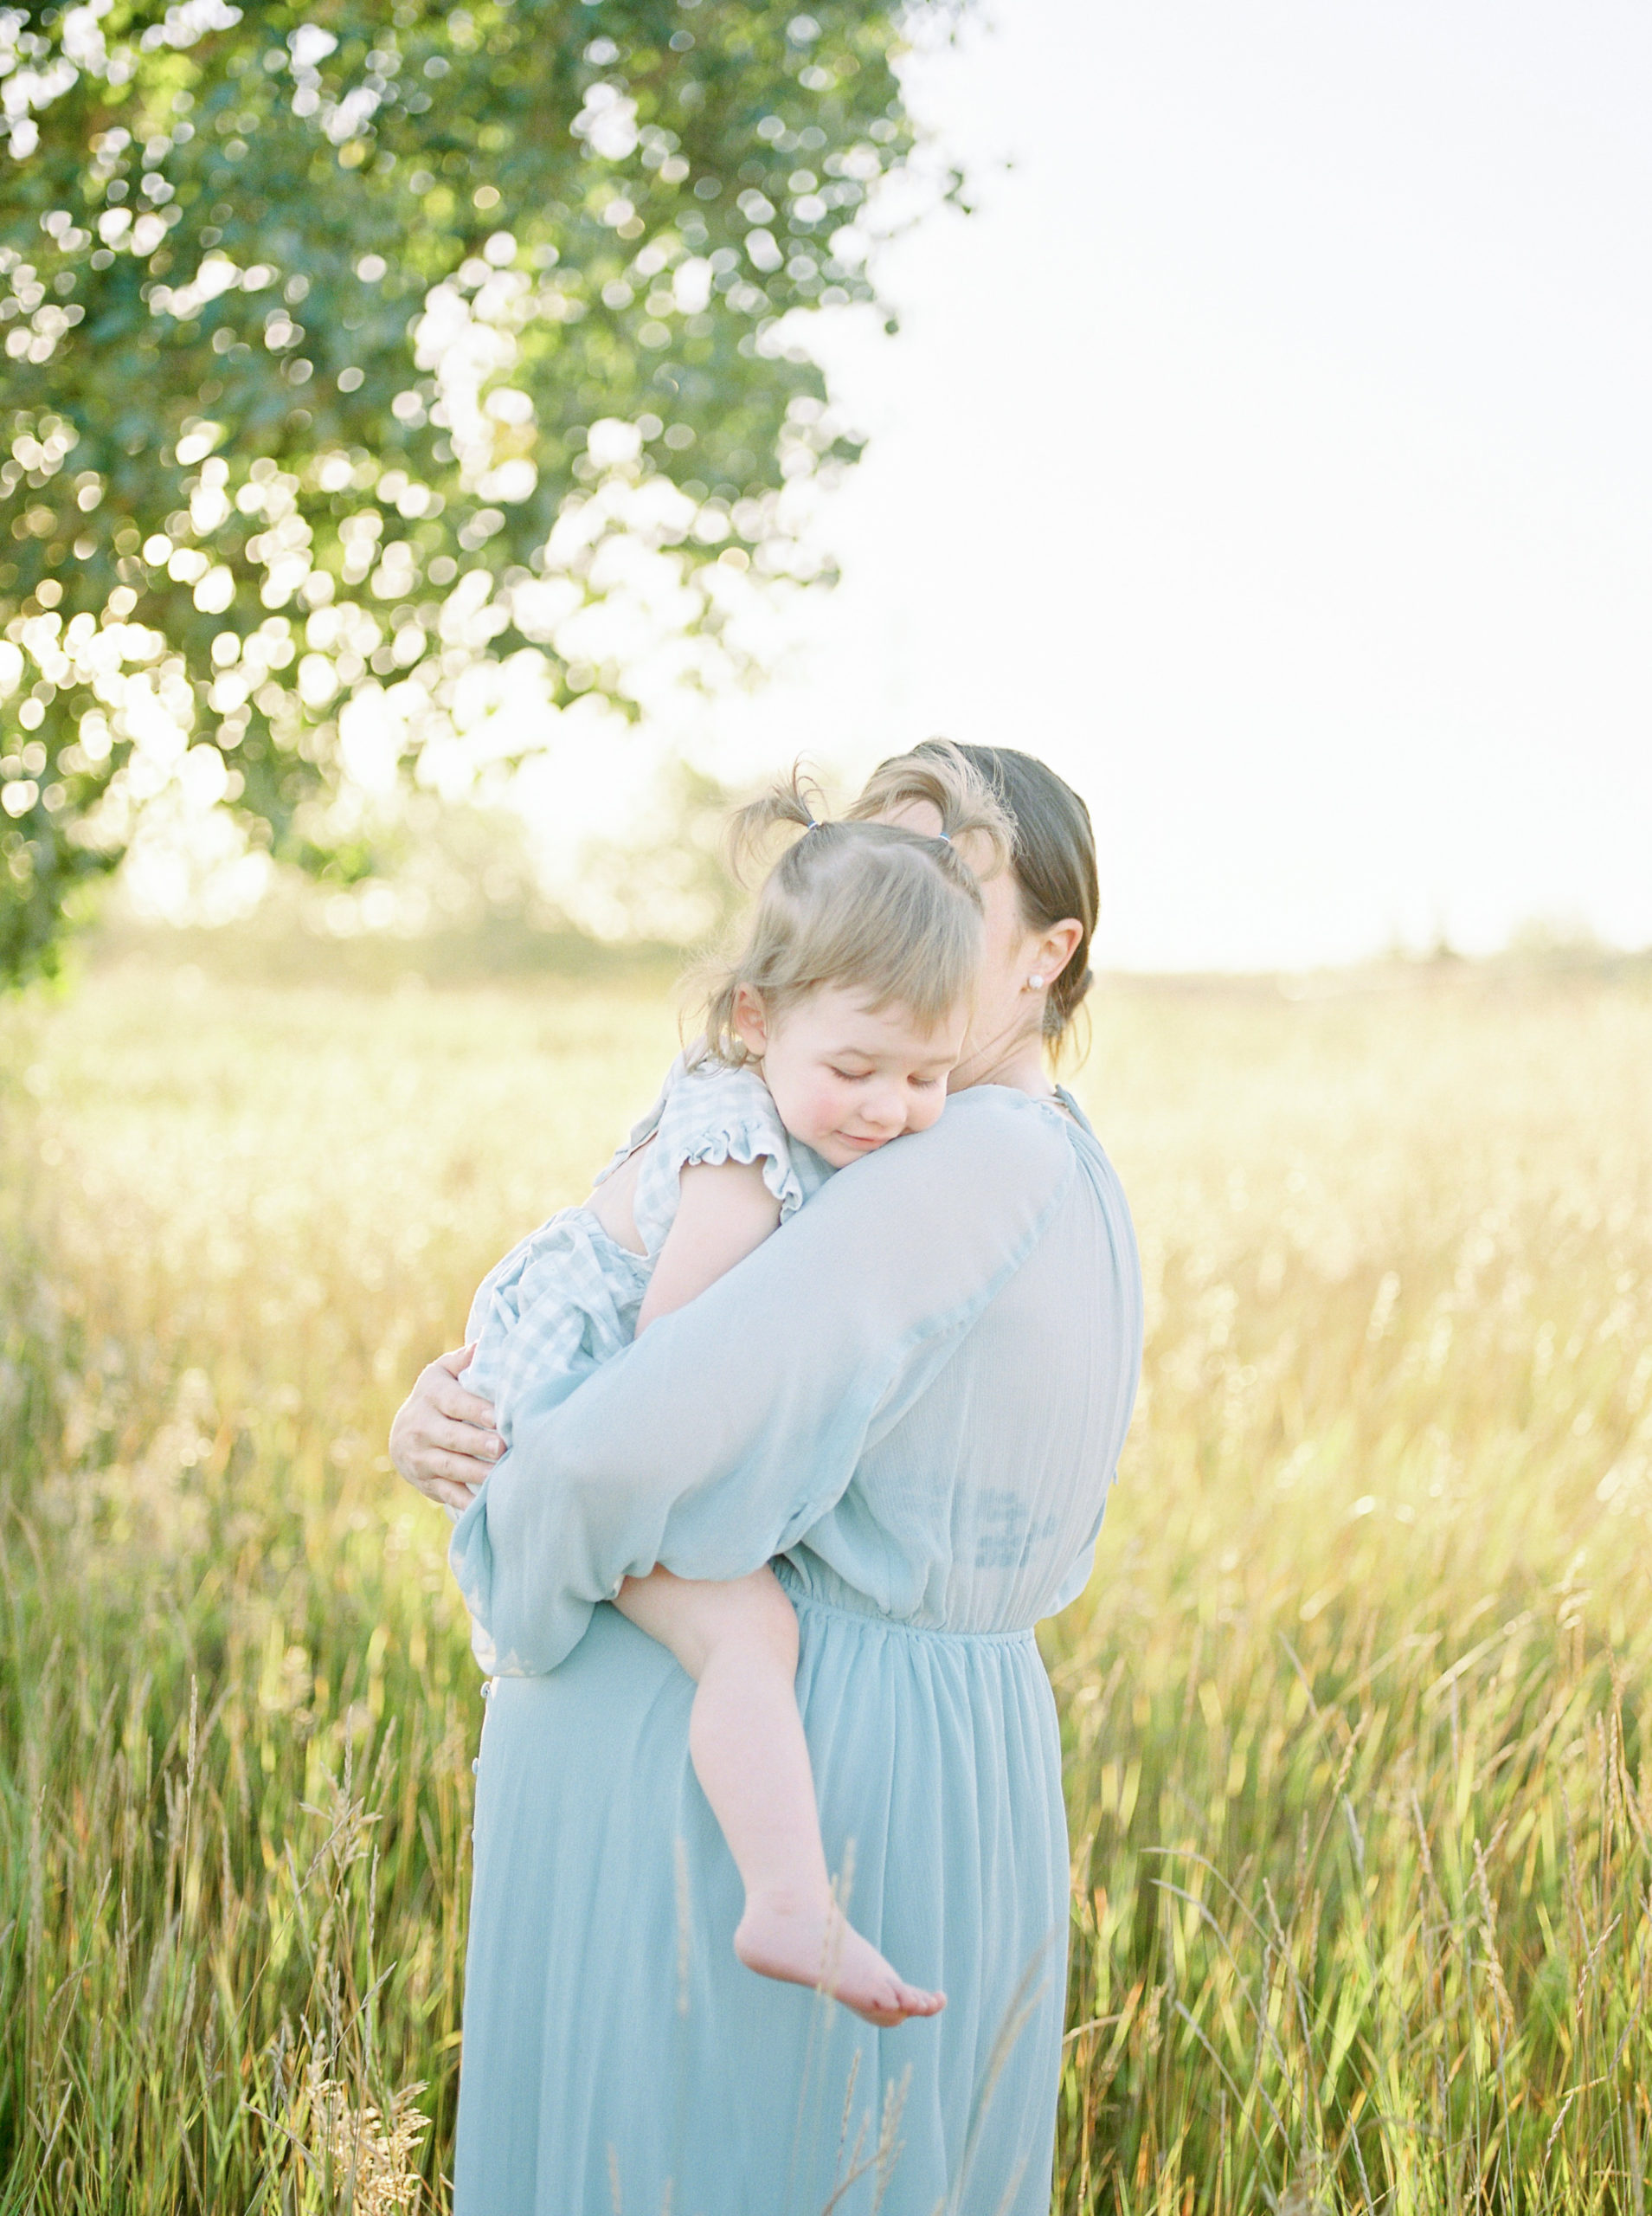 Outdoor Edmonton Maternity Photography Session with expectant mom and toddler